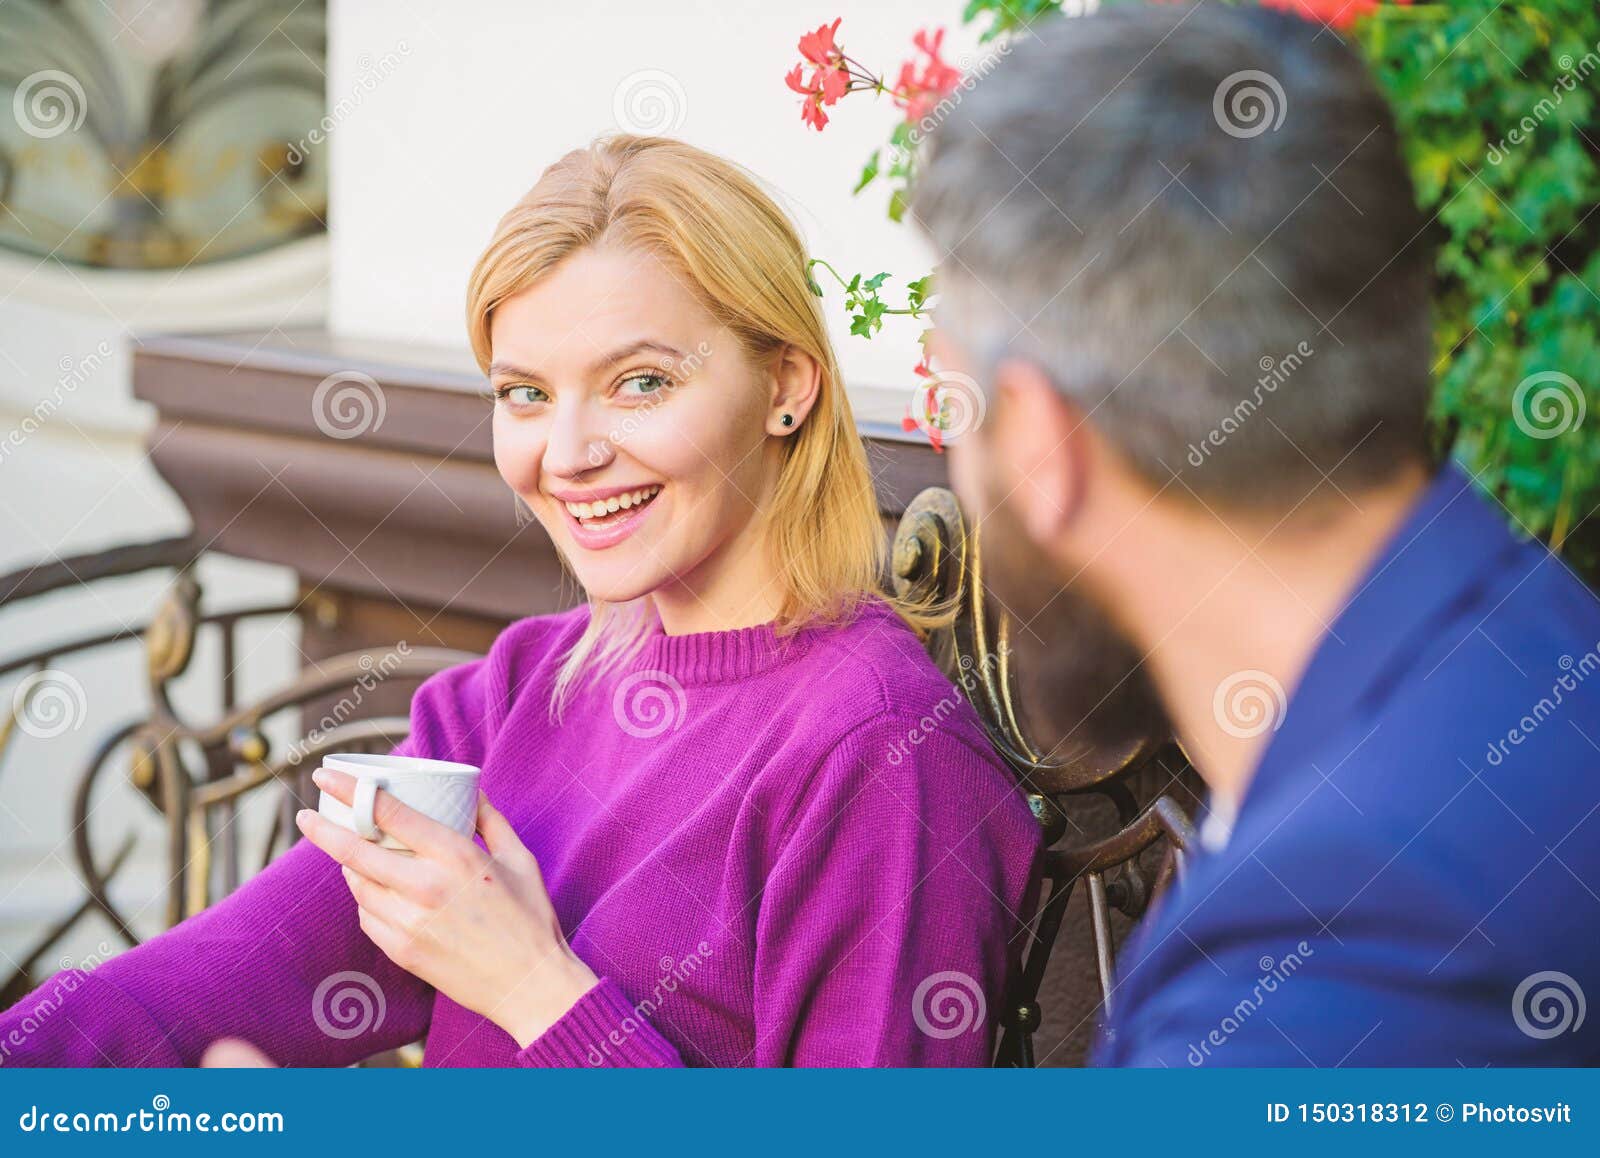 Woman And Man With Beard Relax In Cafe First Meet Of Girl And Mature Man Morning Coffee